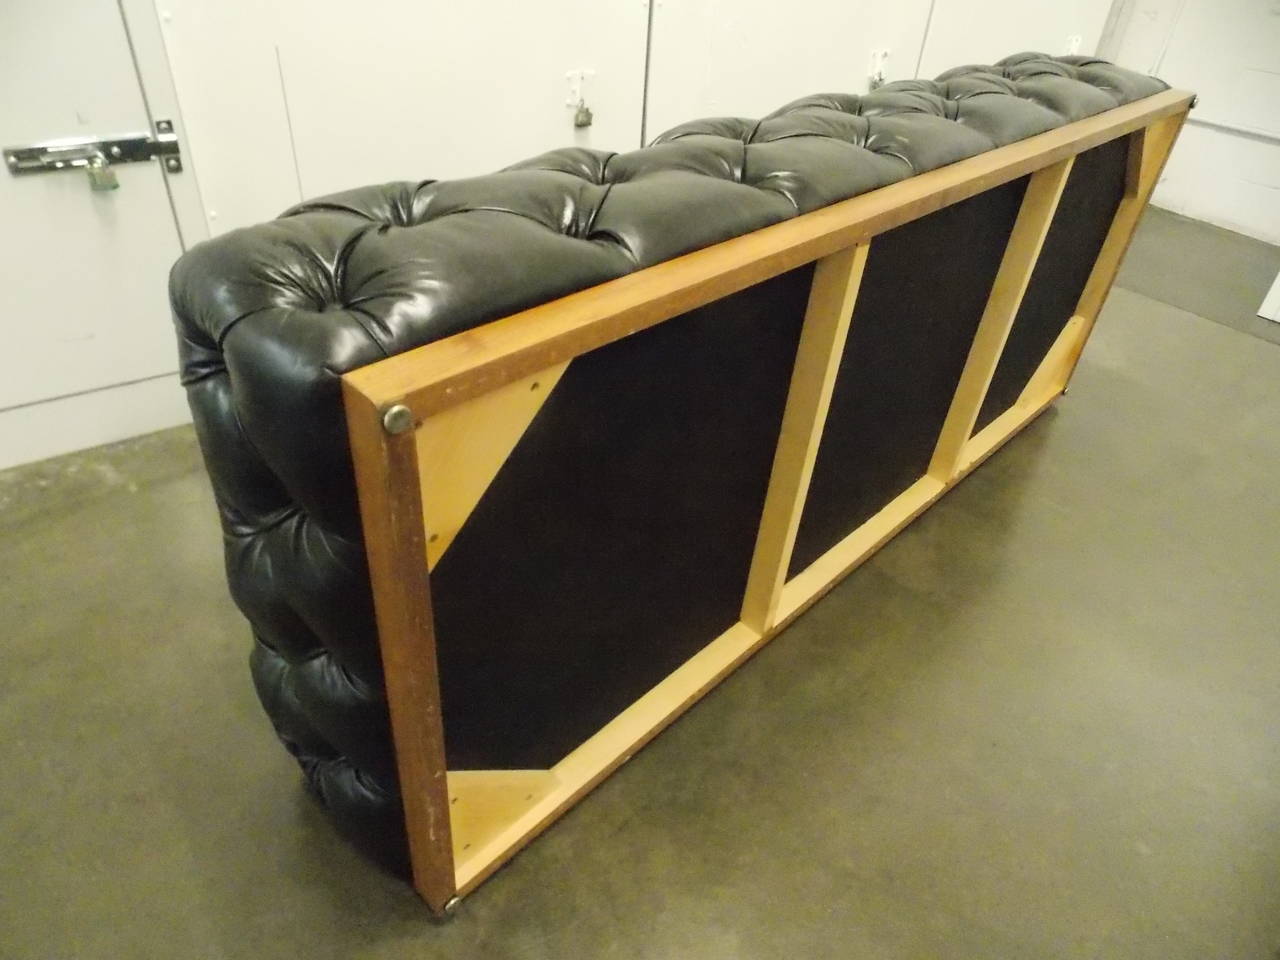 leather tufted daybed